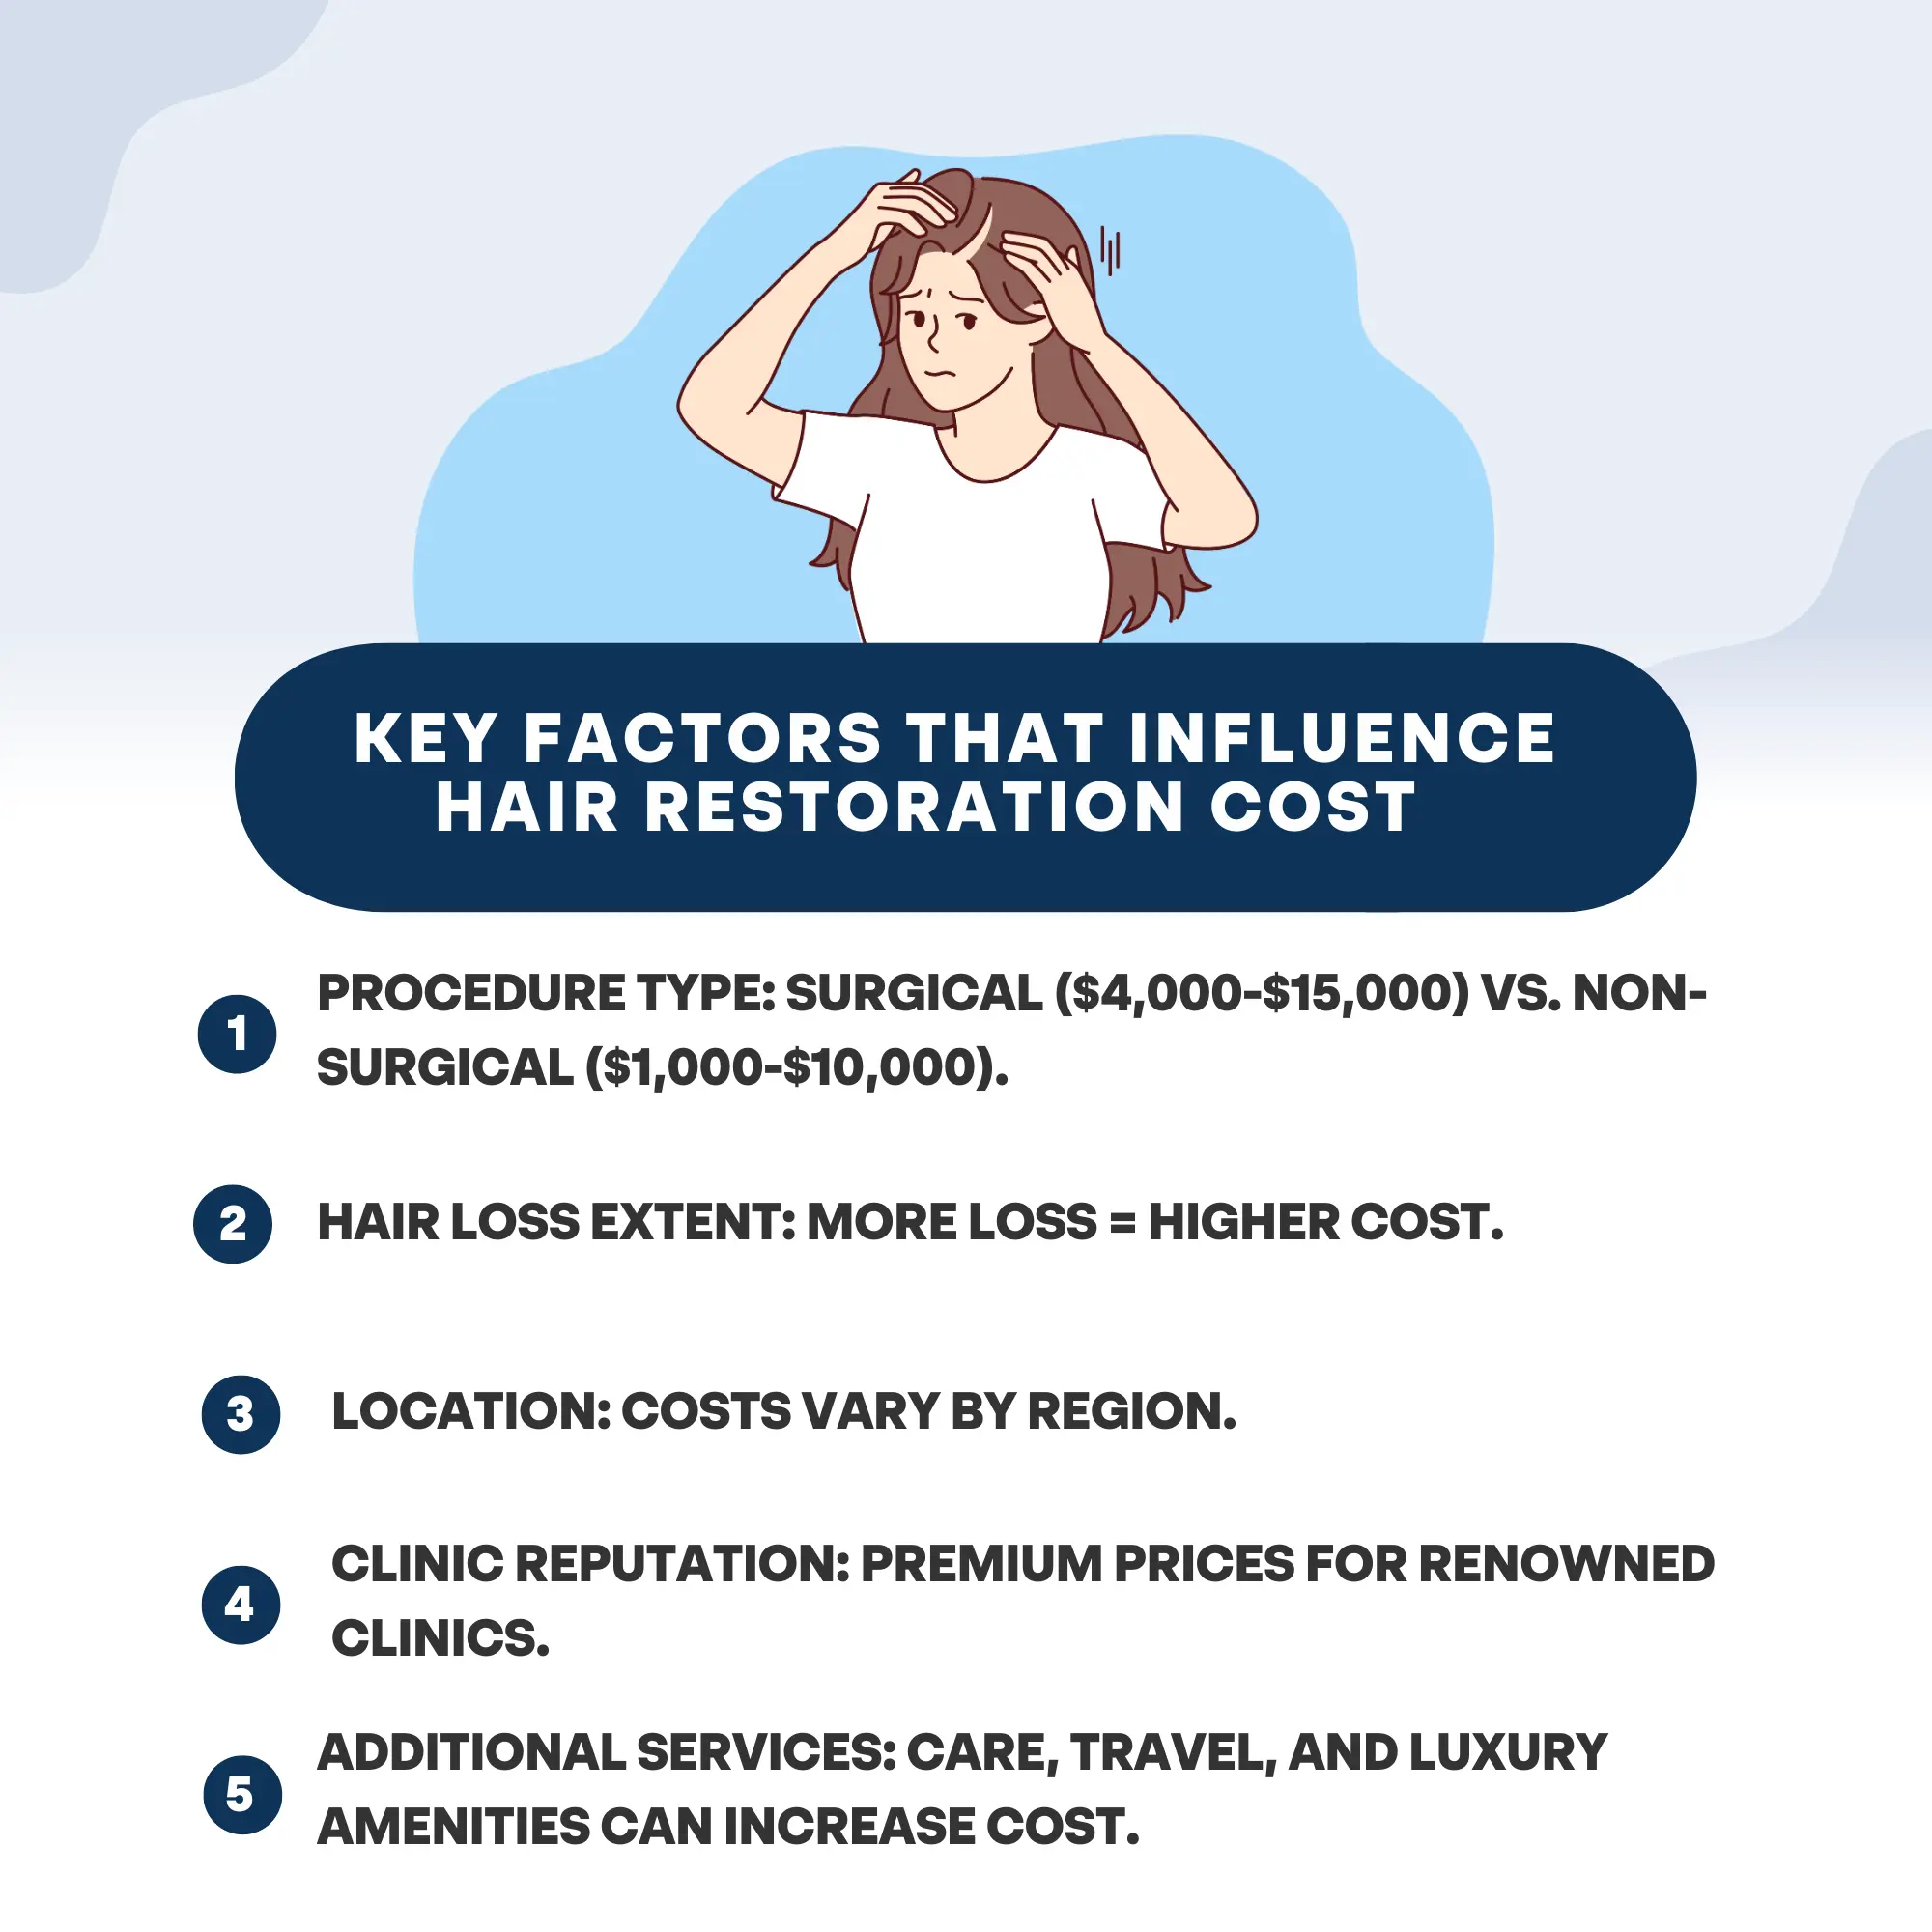 Key Factors That Influence Hair Restoration Cost | PHR